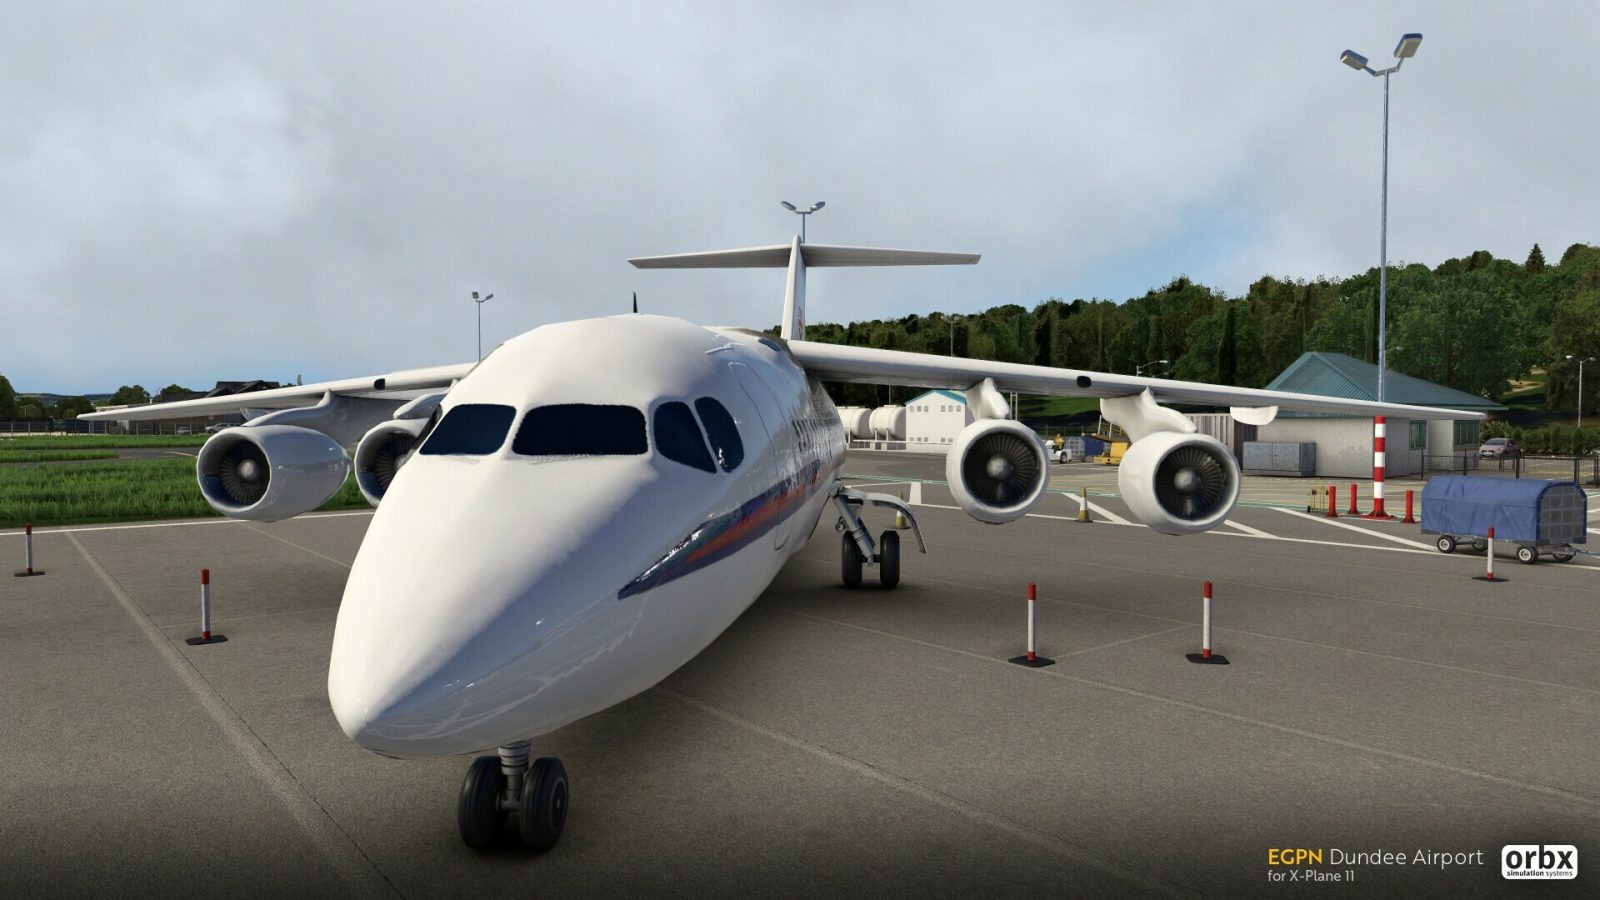 Orbx Dundee Airport-8158 